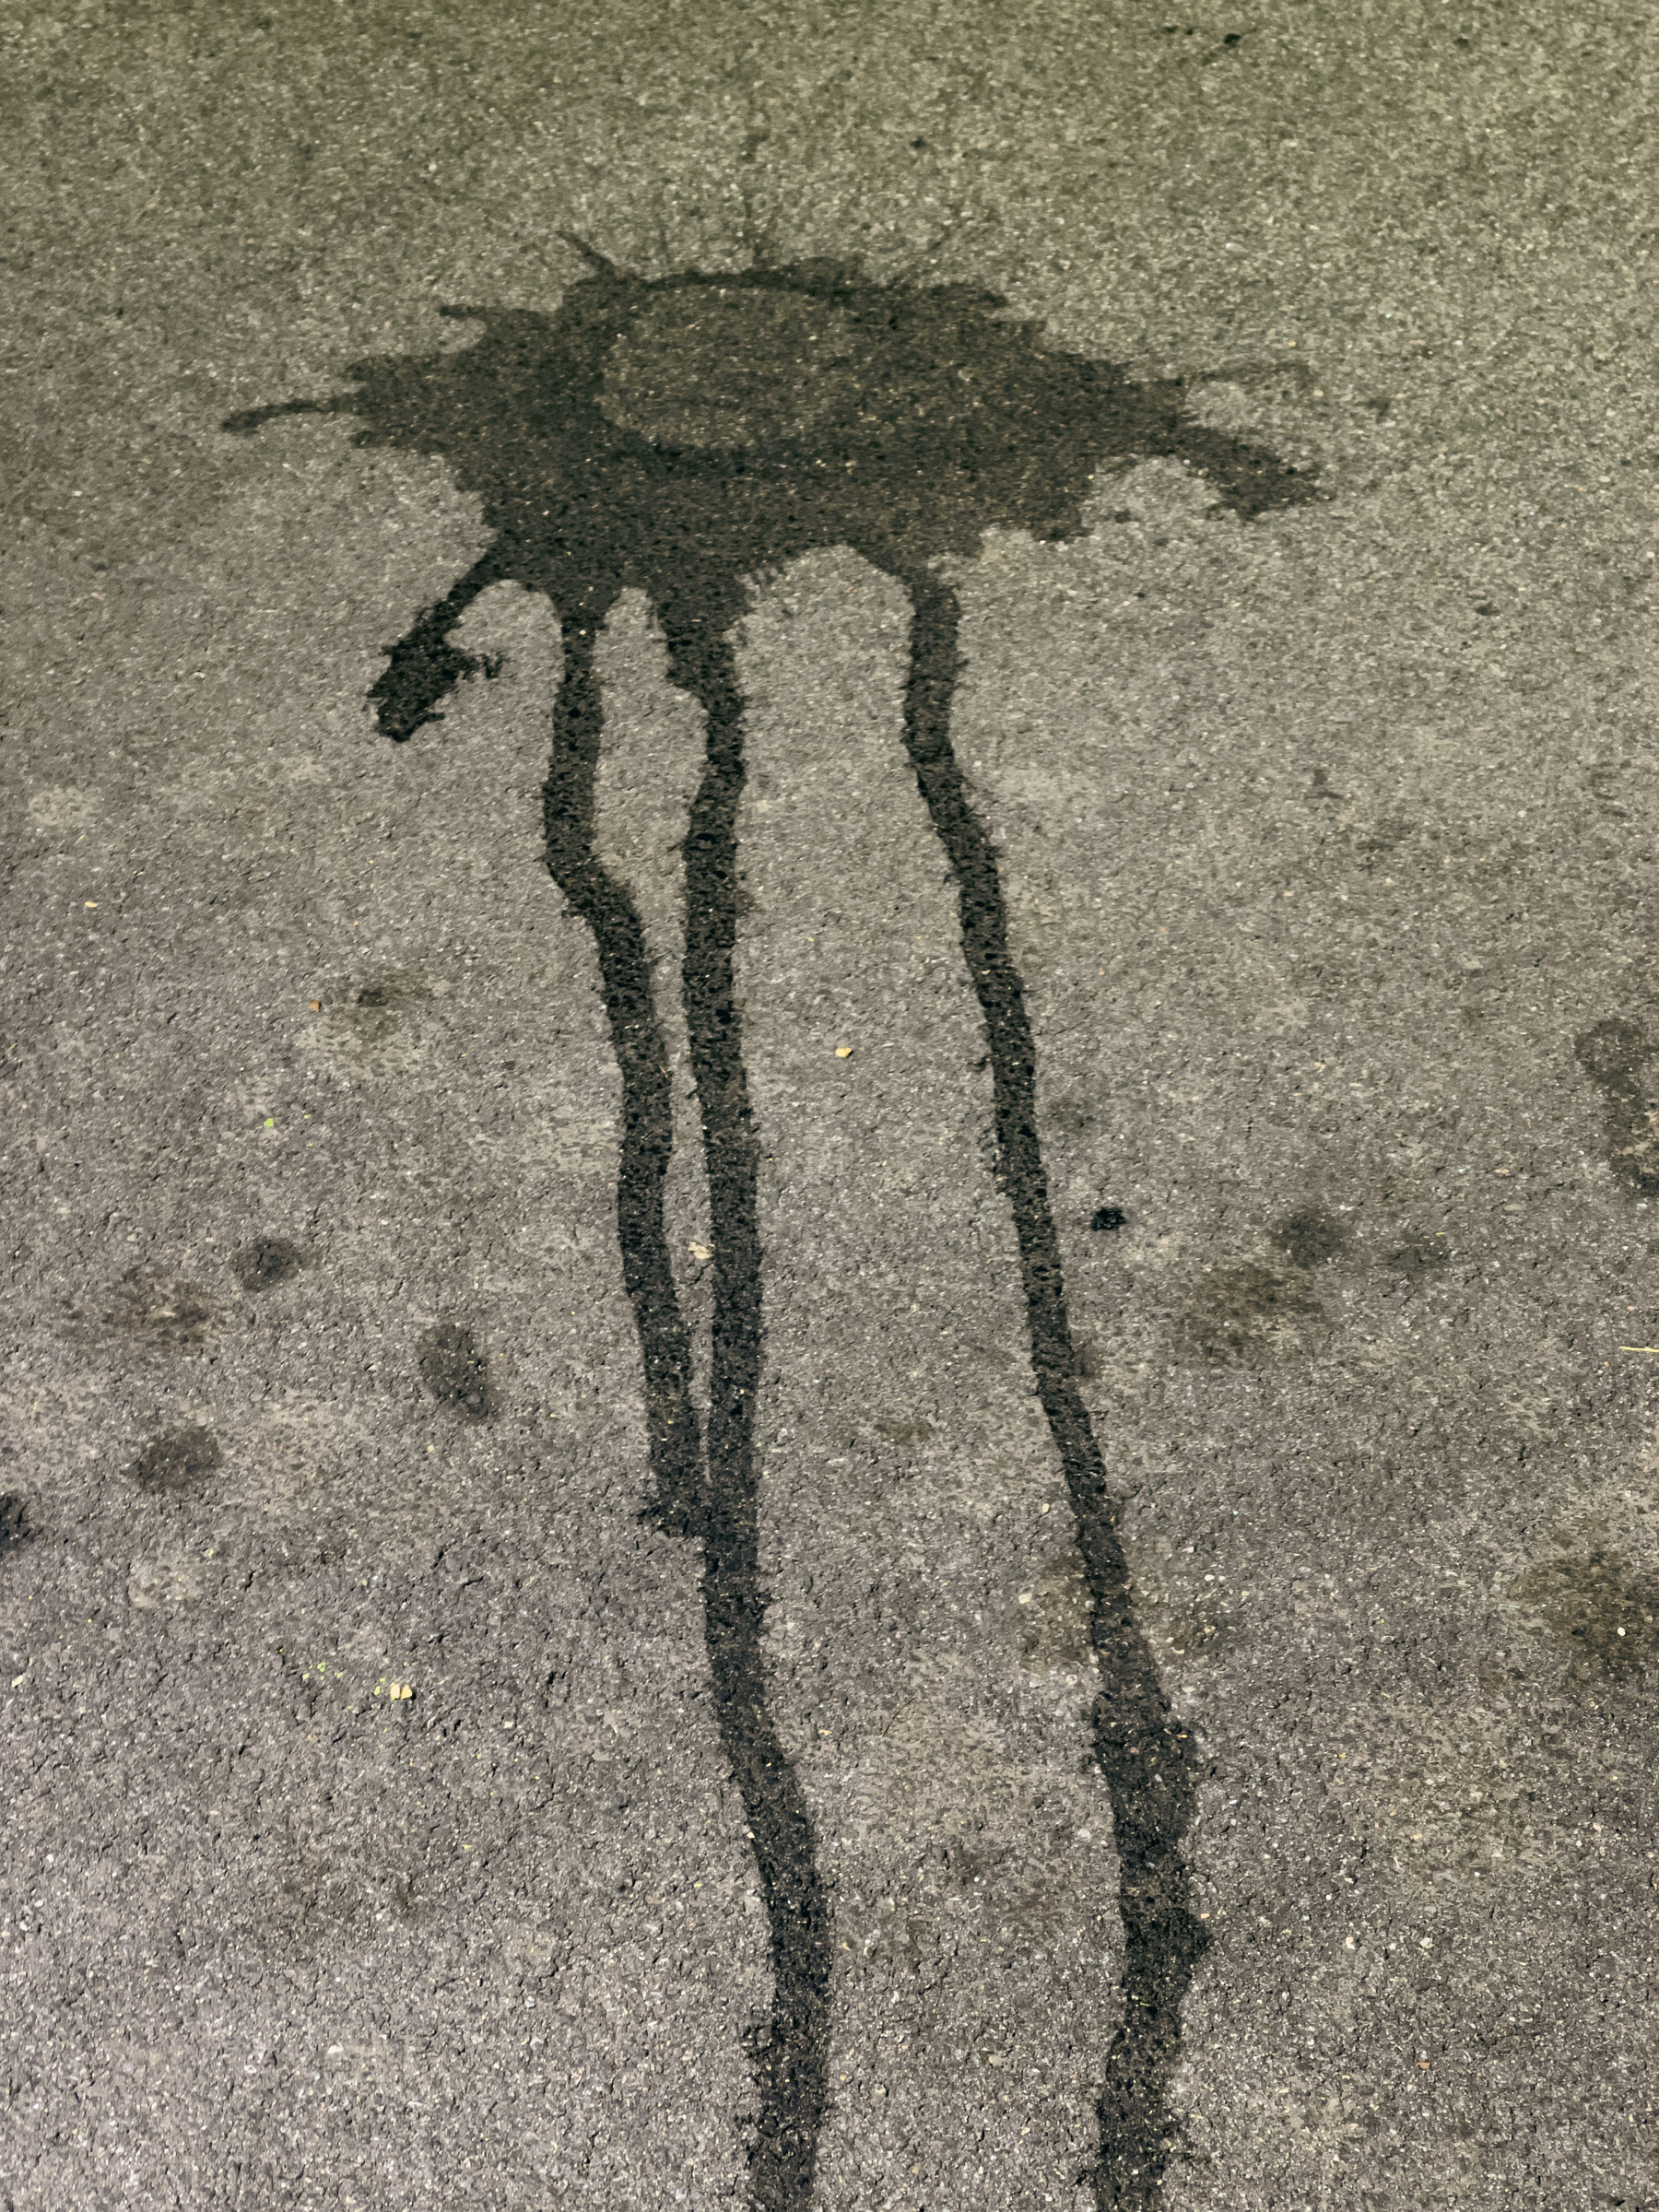 Liquid stain on asphalt pavement, streams running down from it.